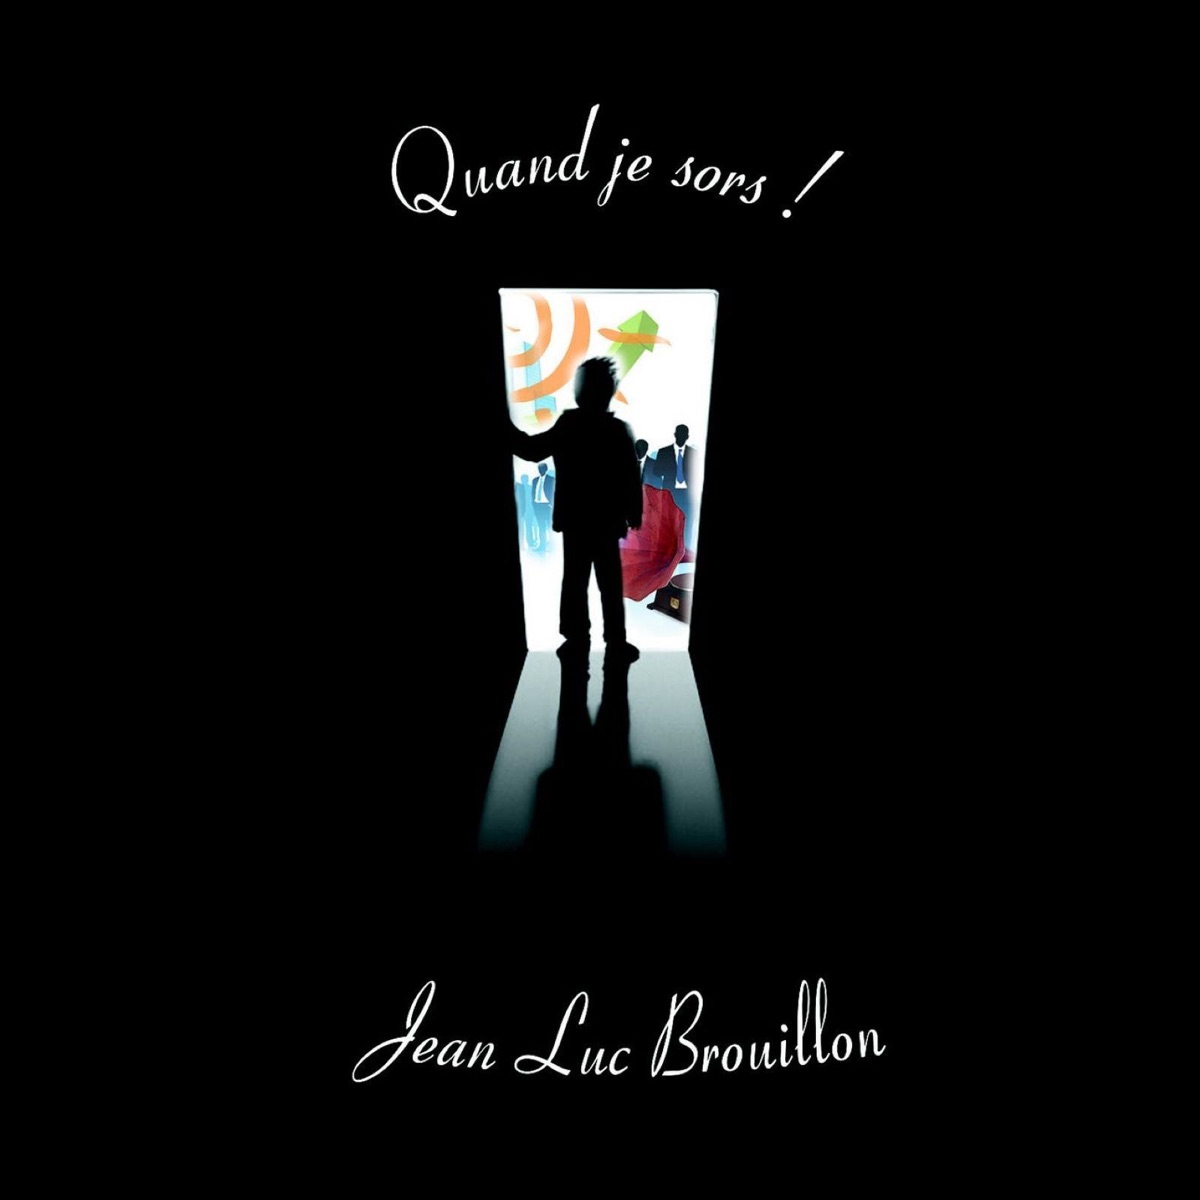 Chansons COULEURS by Jean Luc Brouillon on Apple Music